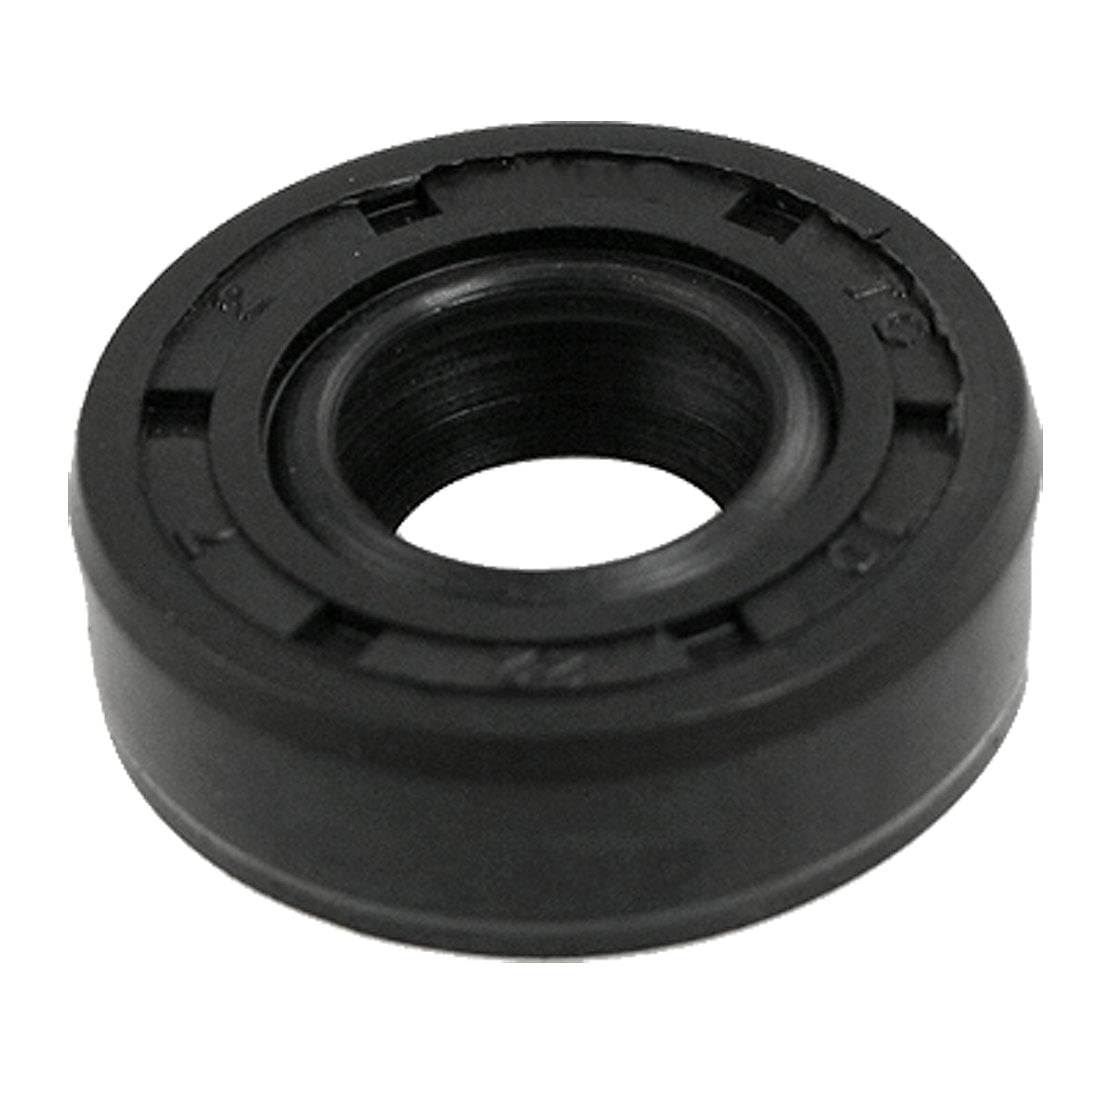 Metric Oil Shaft Seal 30 x 62 x 7mm Double Lip  Price for 1 pc 